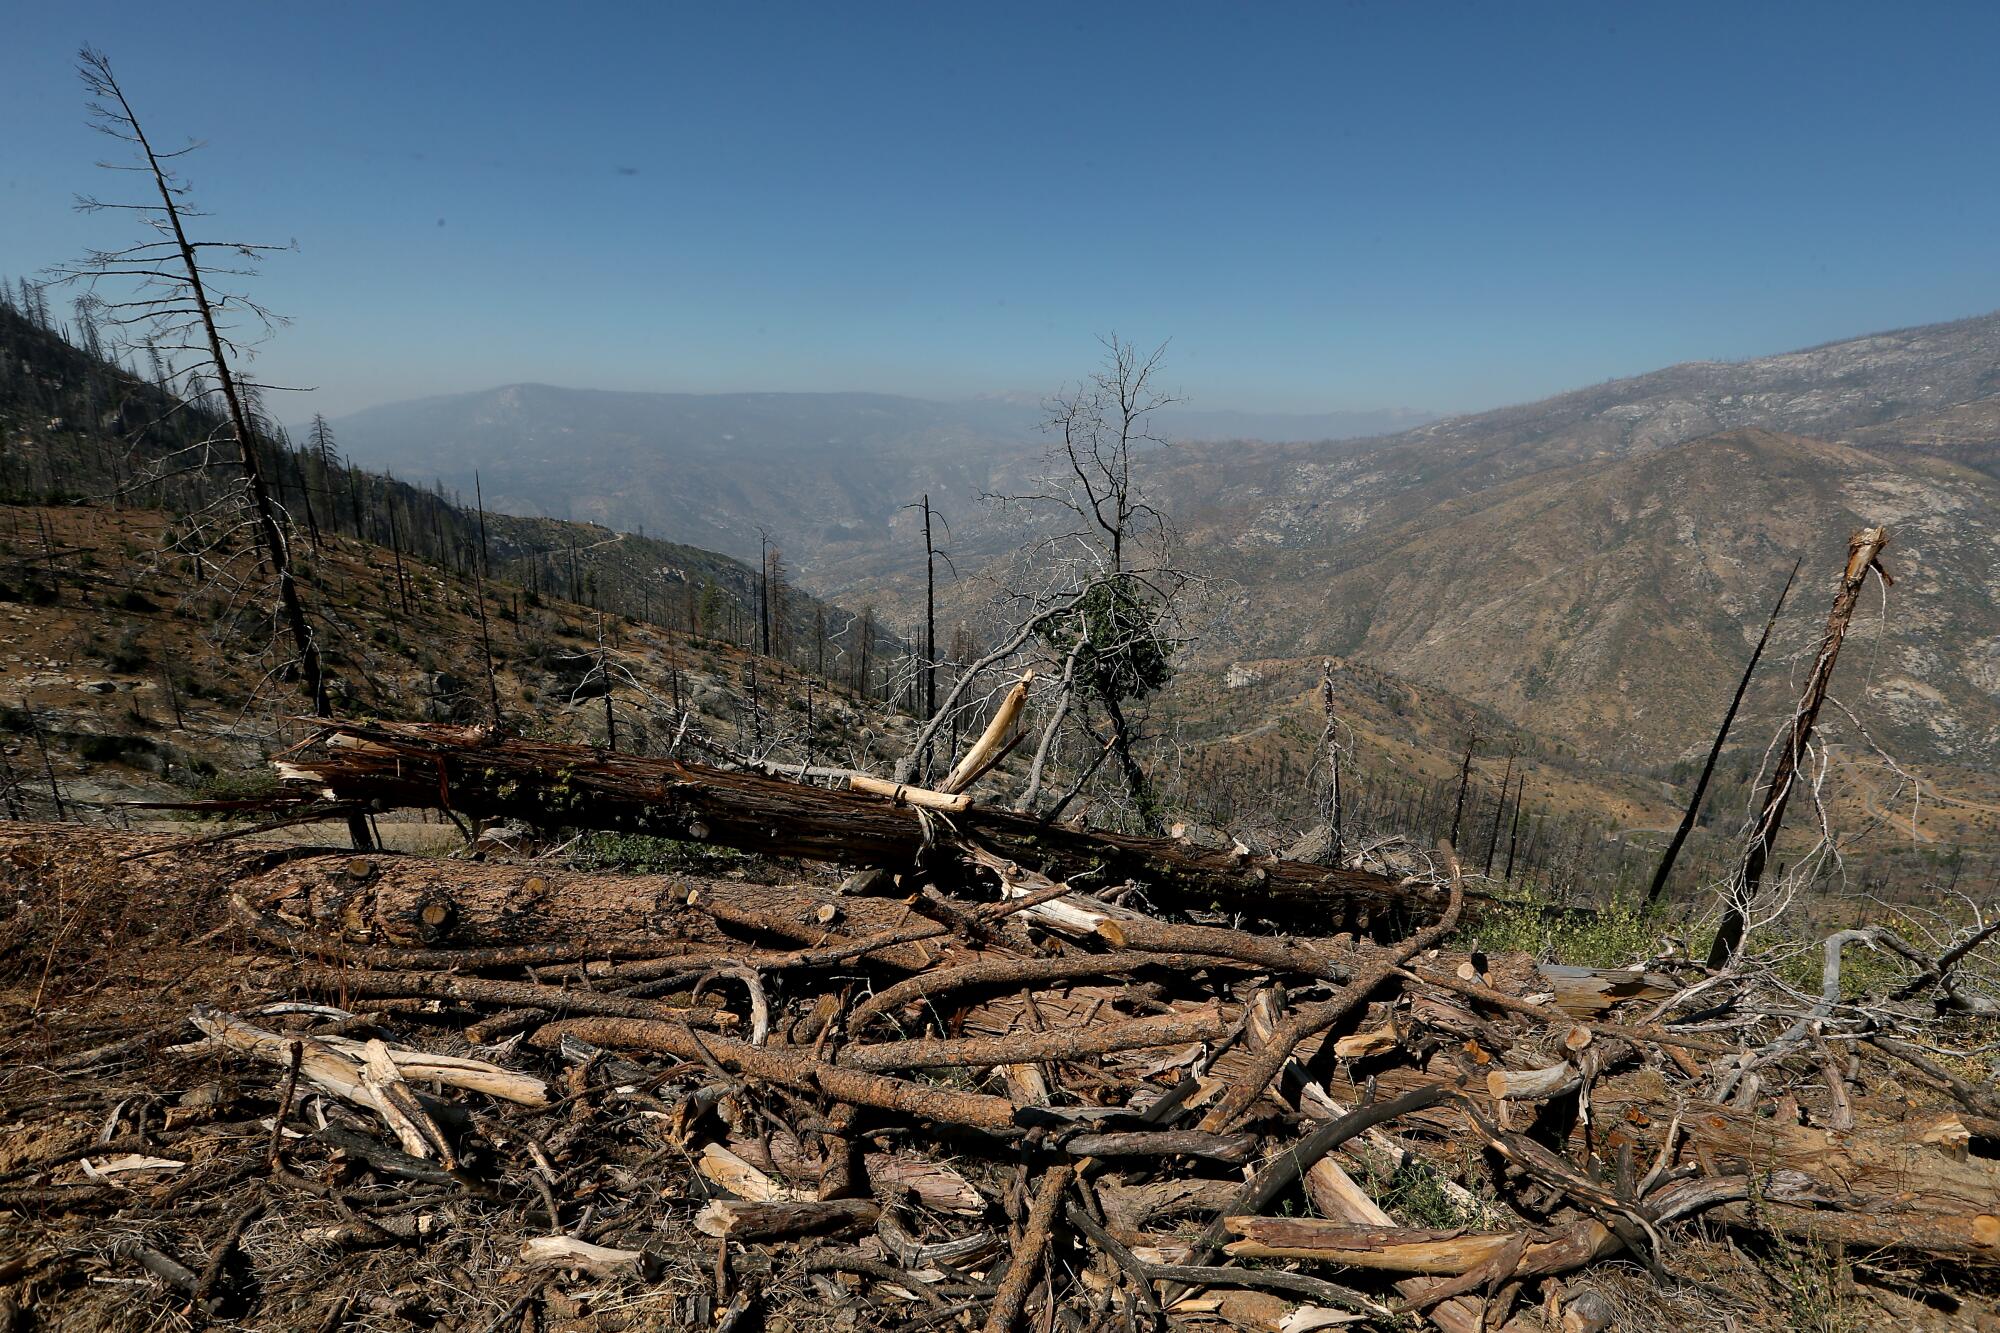 Tree limbs and trunks litter the ground in the remains of a burned forest, with rocky mountains in the background